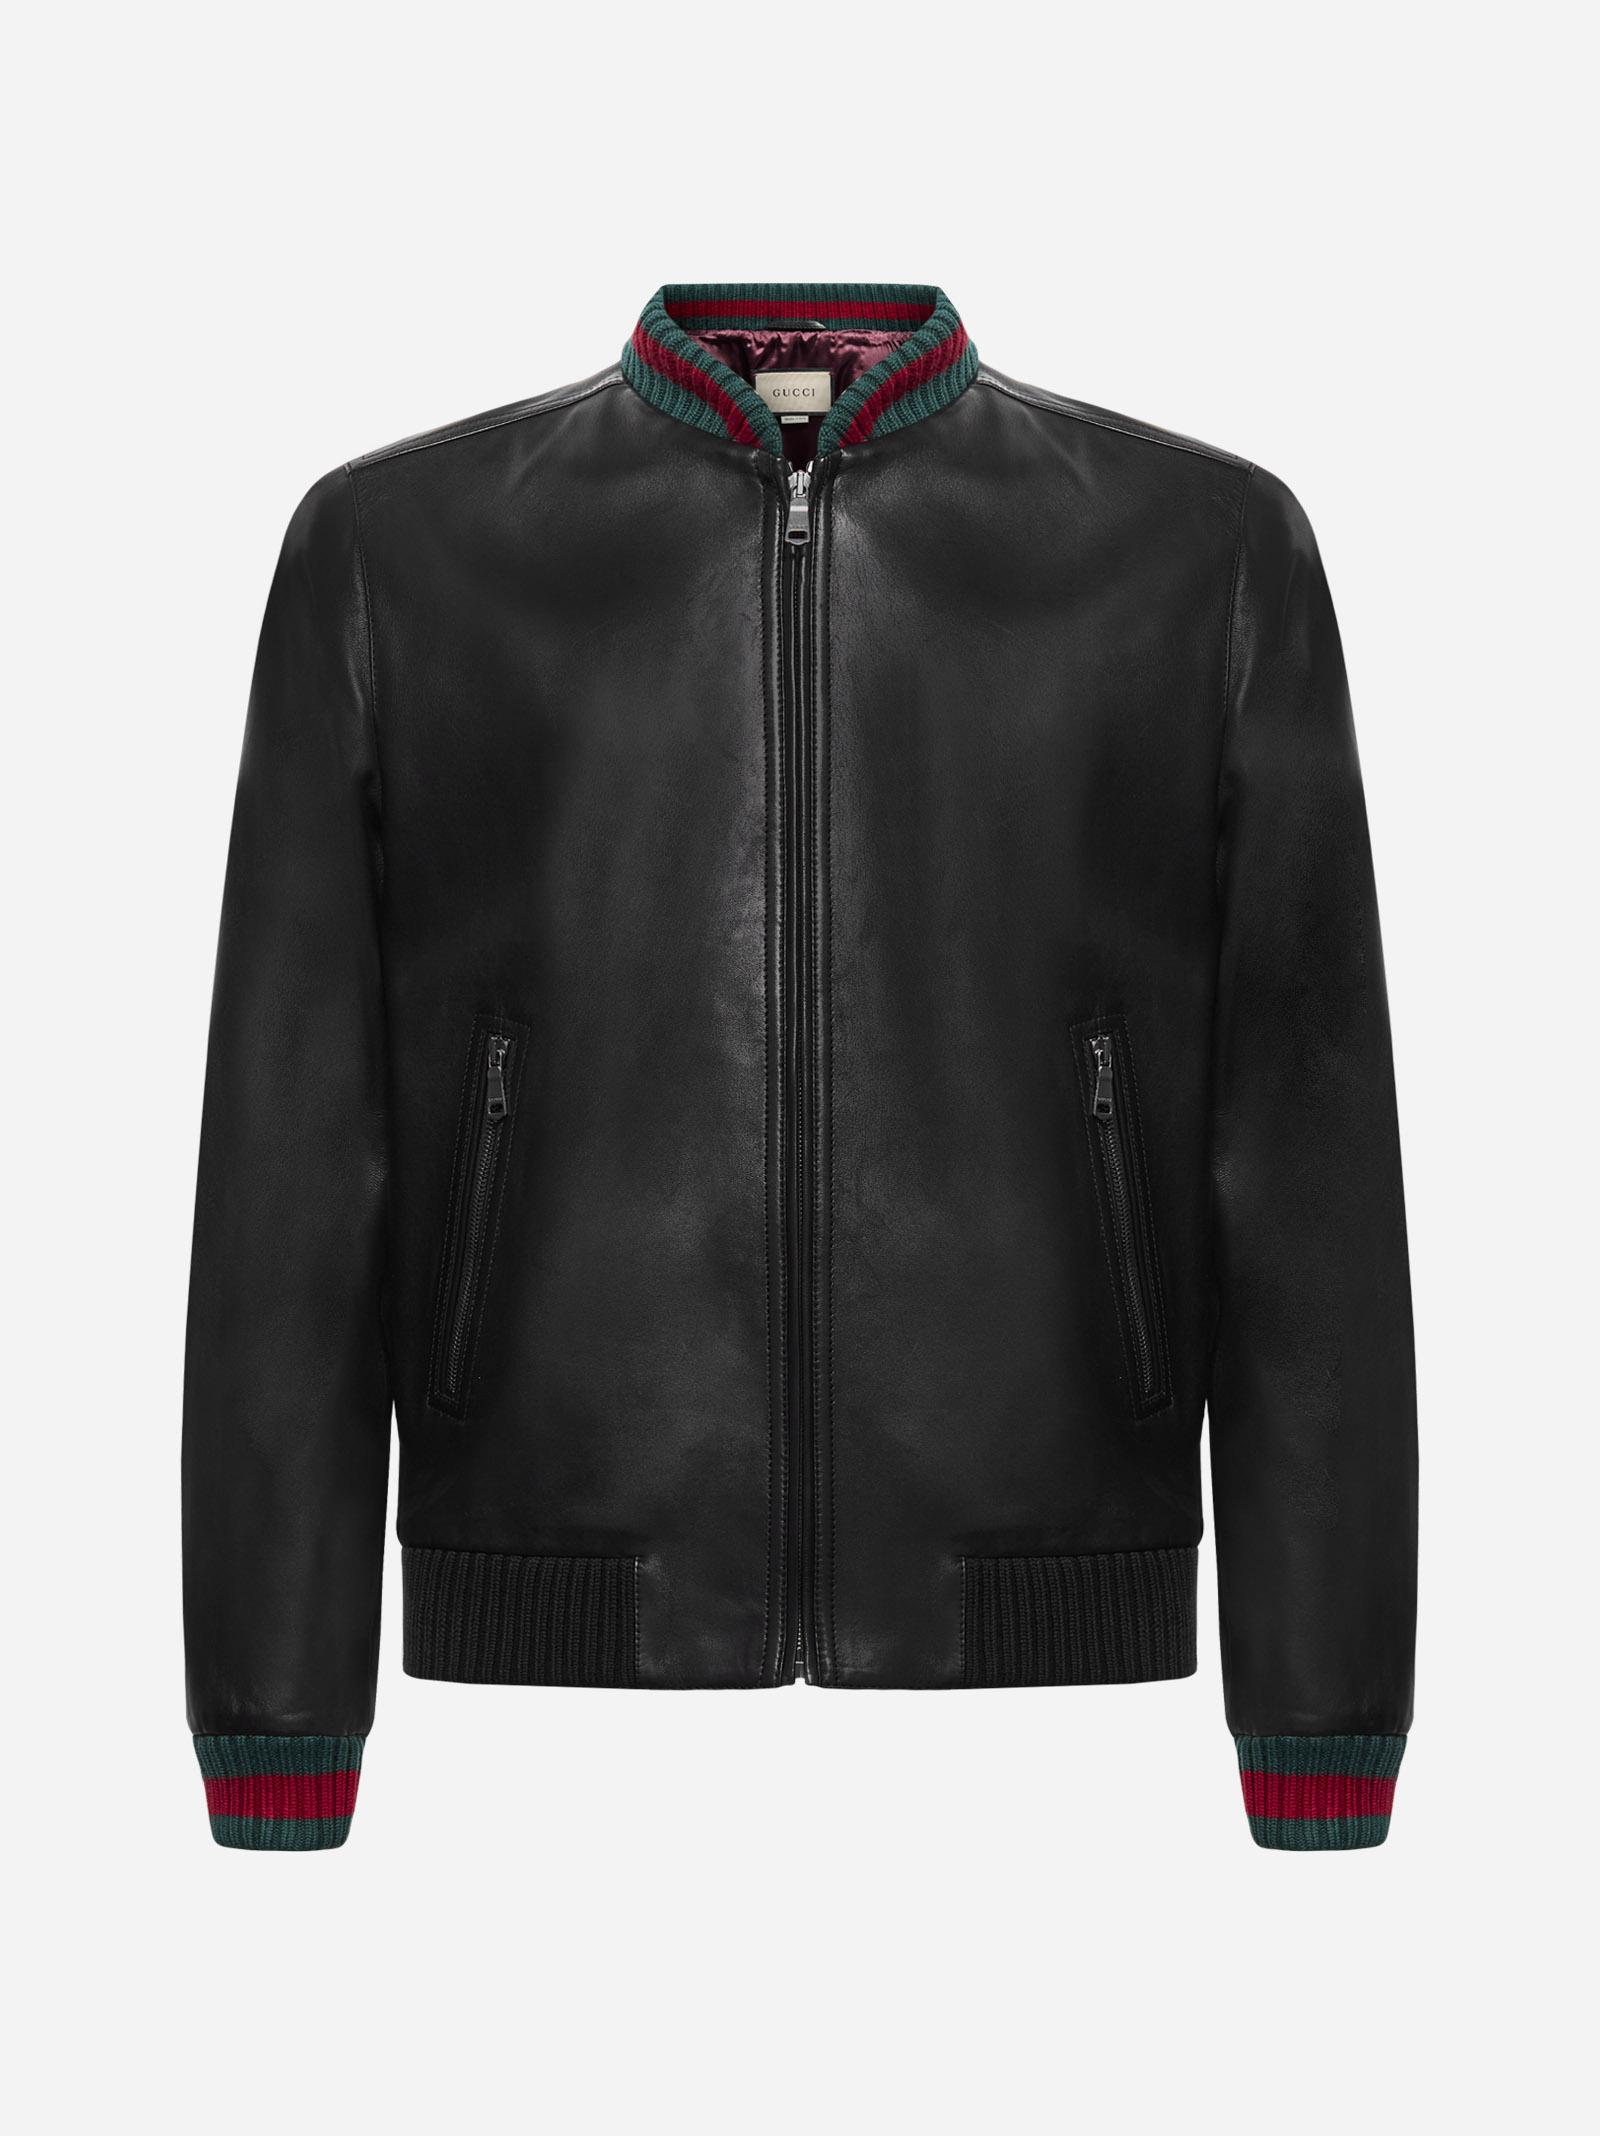 Gucci Men's GG Embossed Leather Jacket